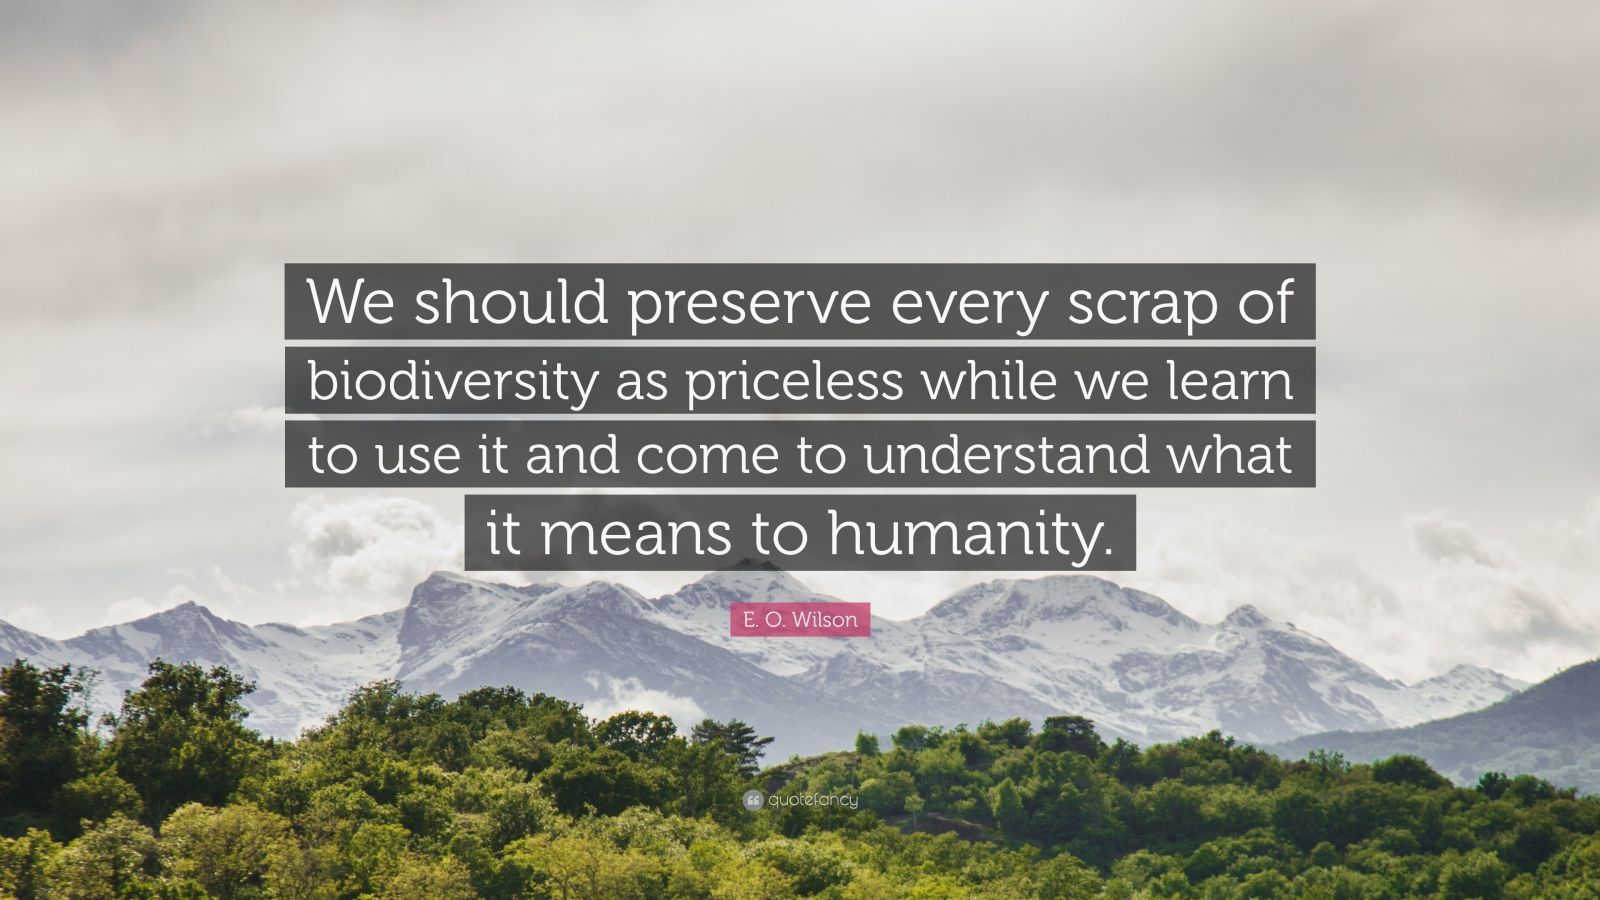 E. O. Wilson Quote: “We should preserve every scrap of biodiversity as priceless while we learn to use it and come to understand what it mean.” (7 wallpaper)